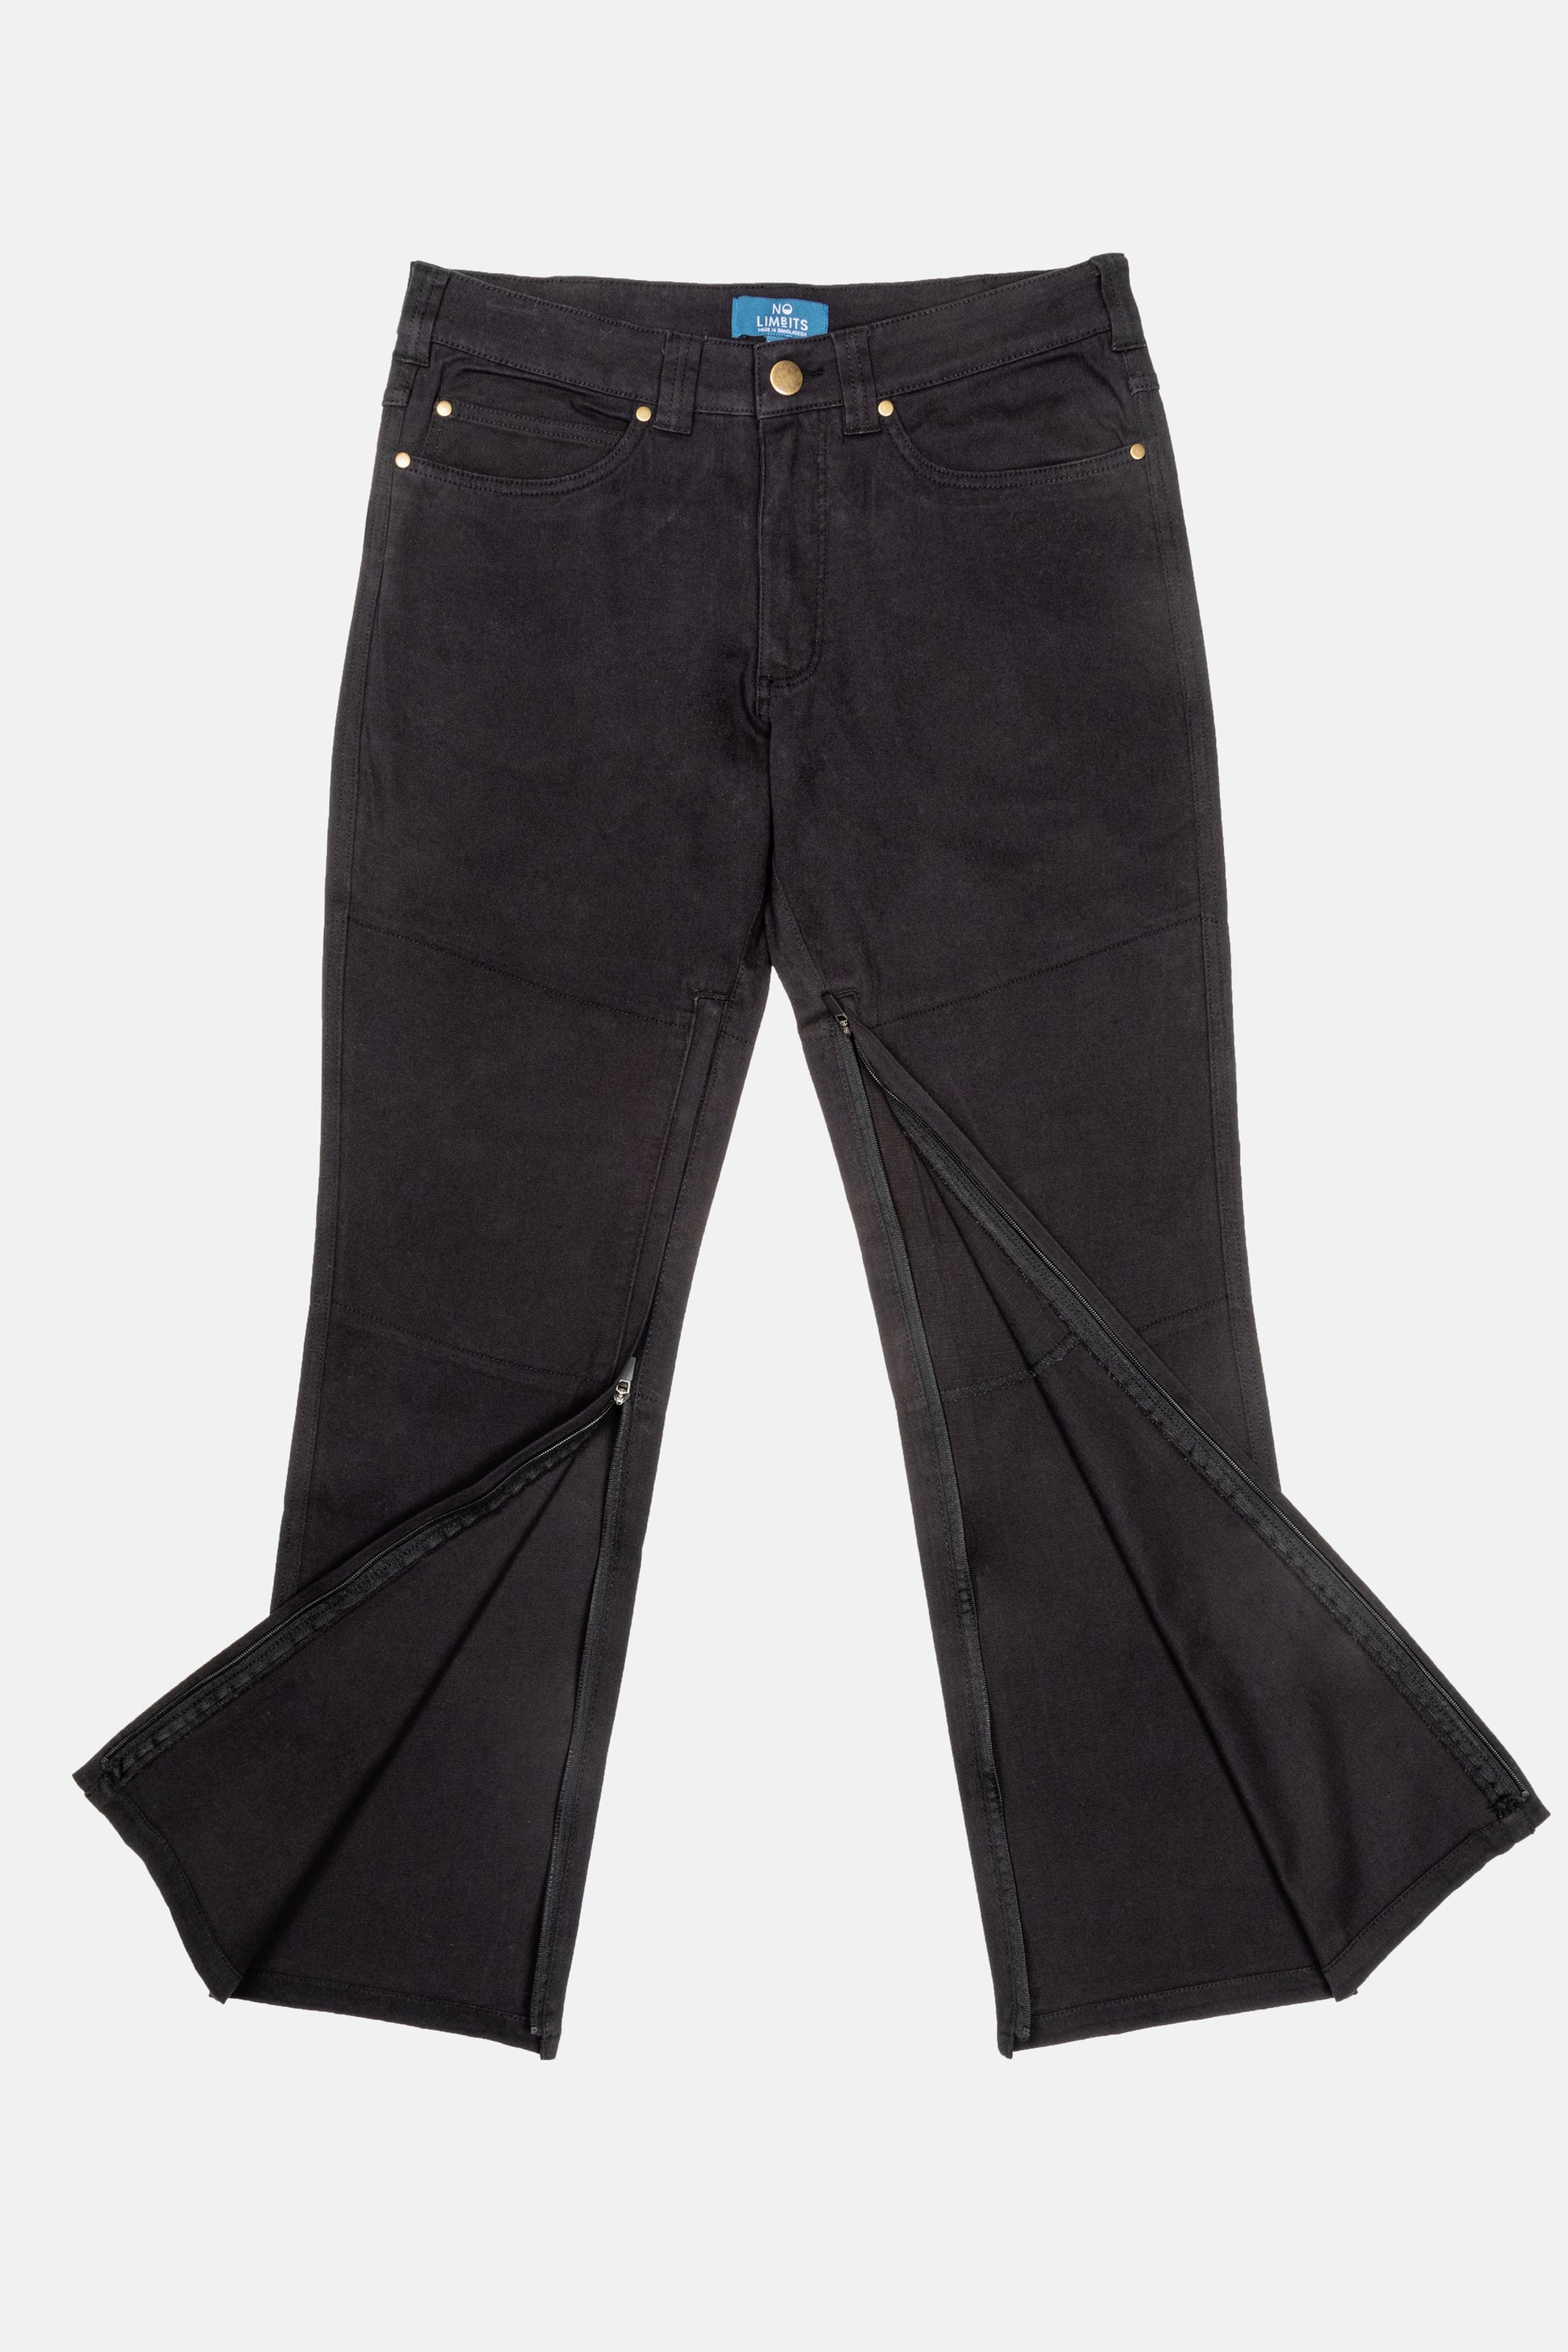 The No Limbits Adaptive Men's Black Unlimbited Pants, which zips from the ankles.